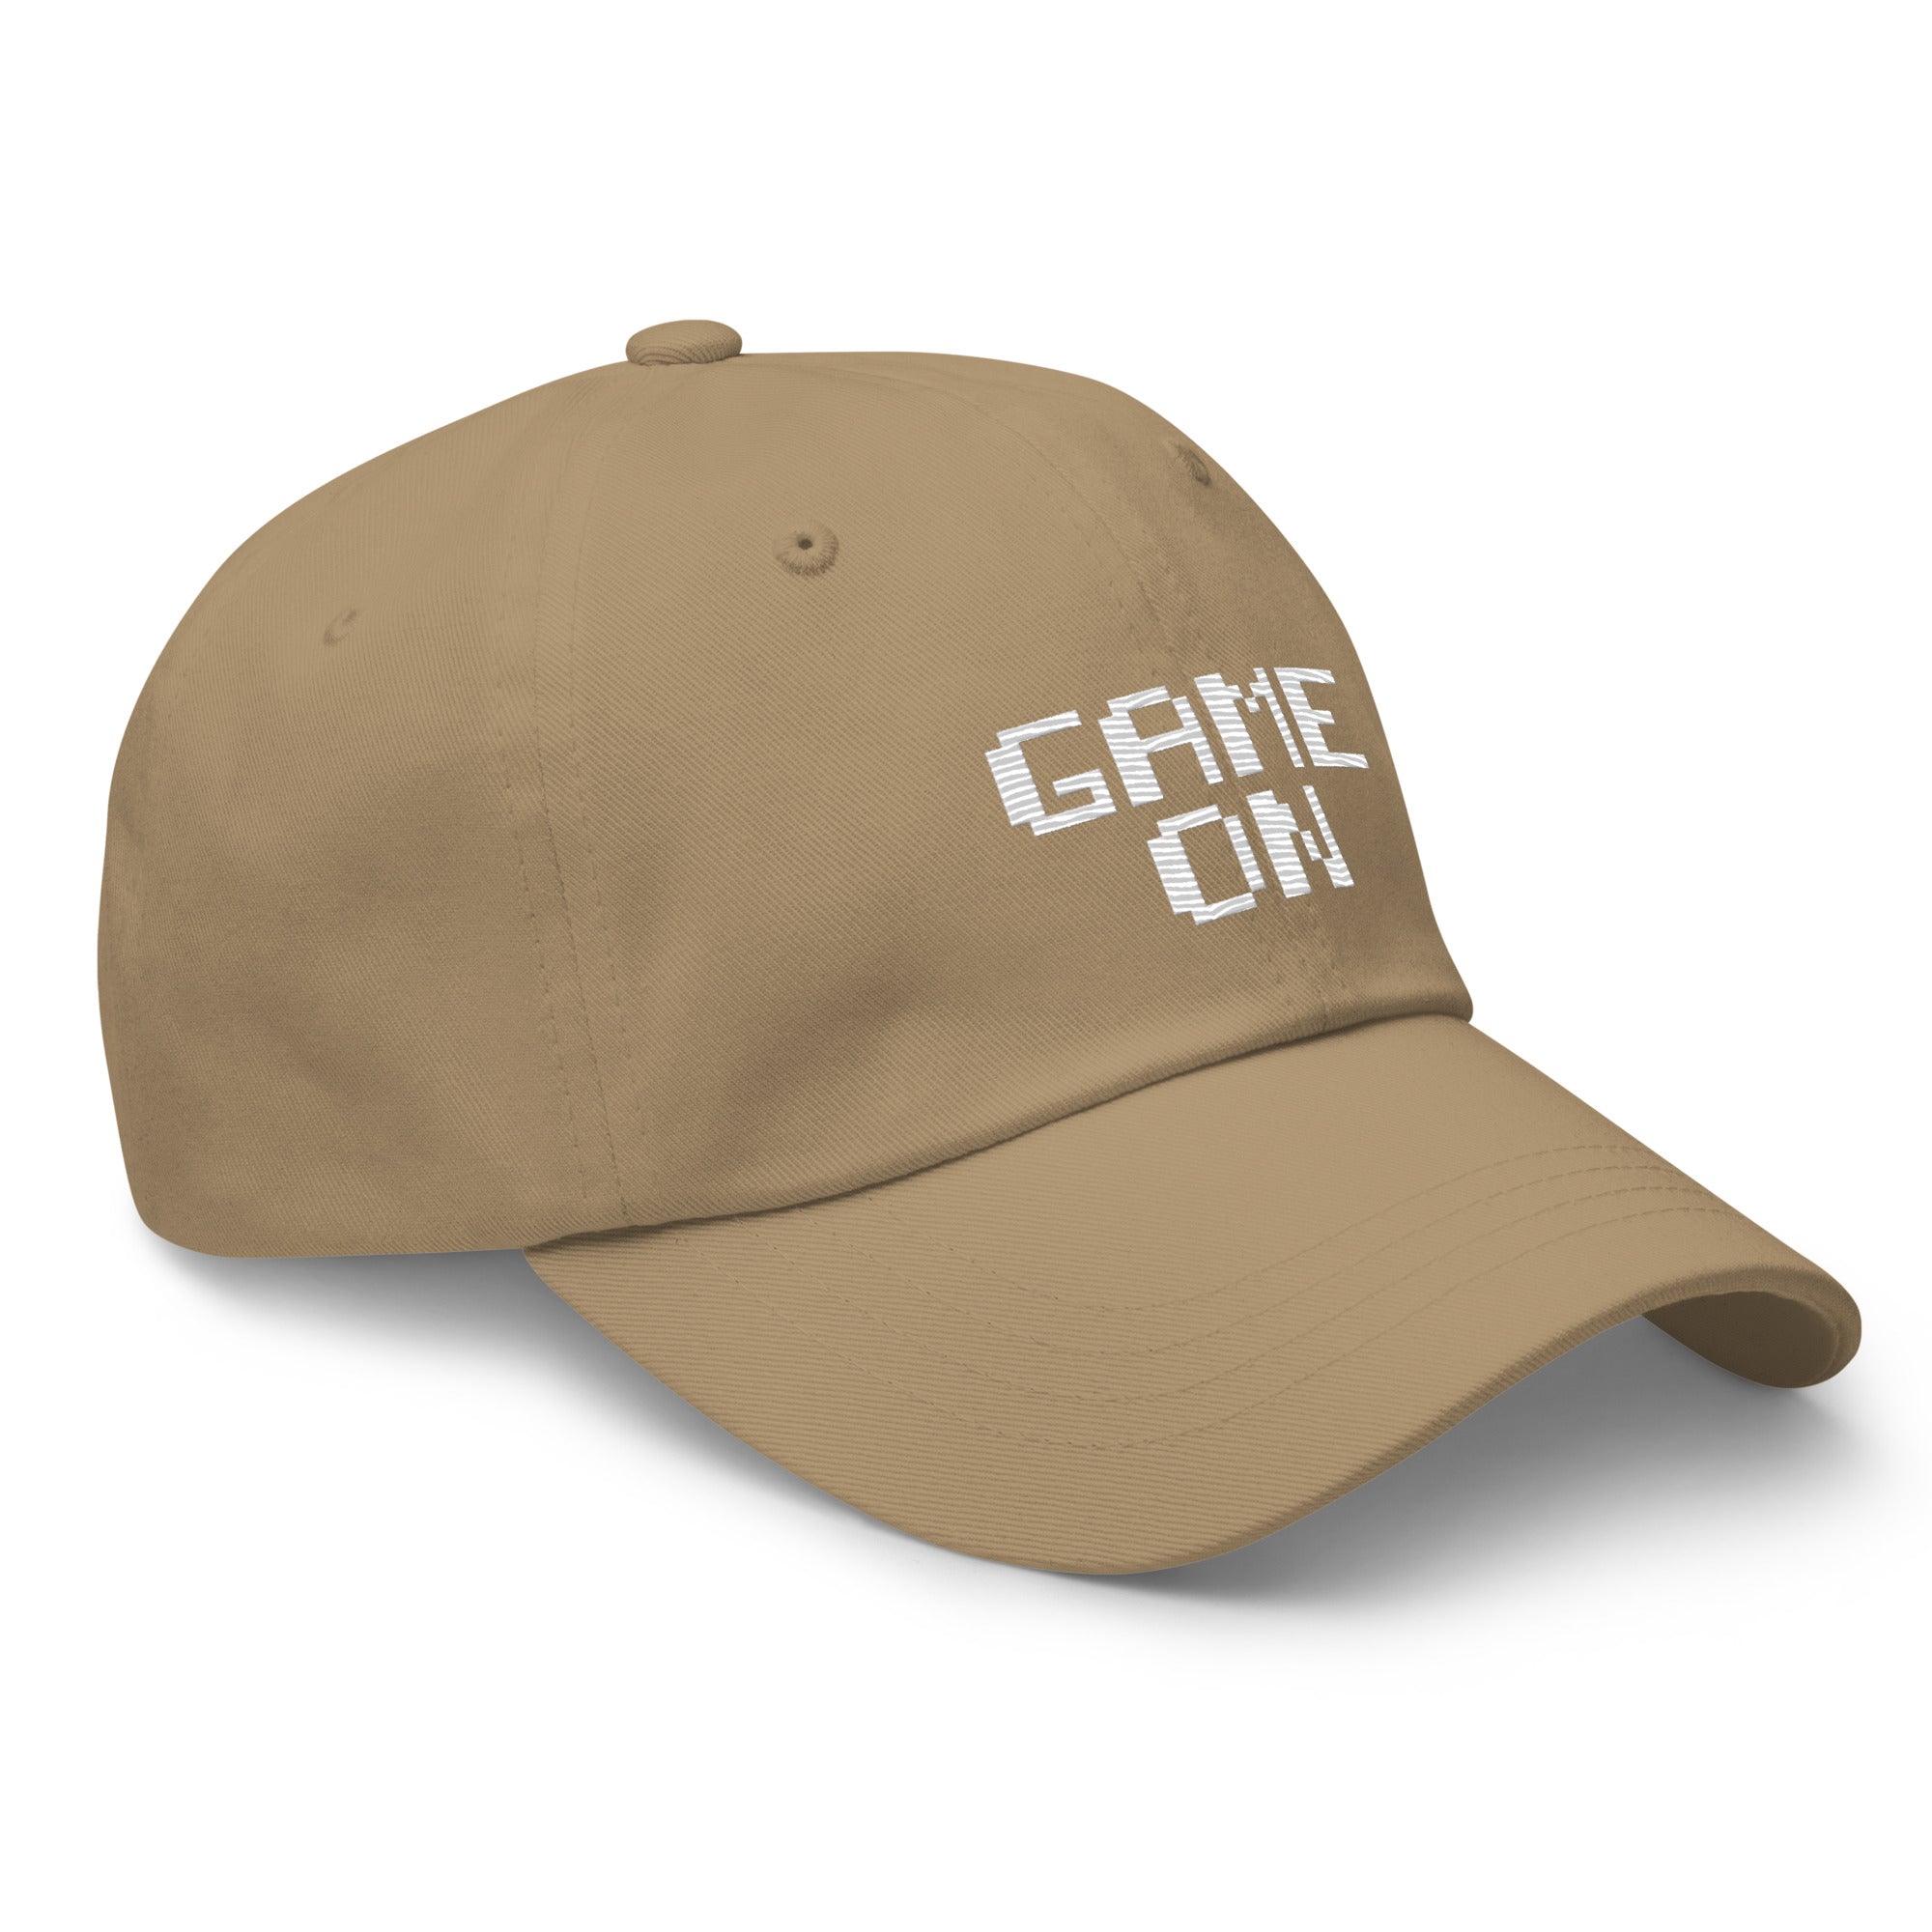 Hat | Game On